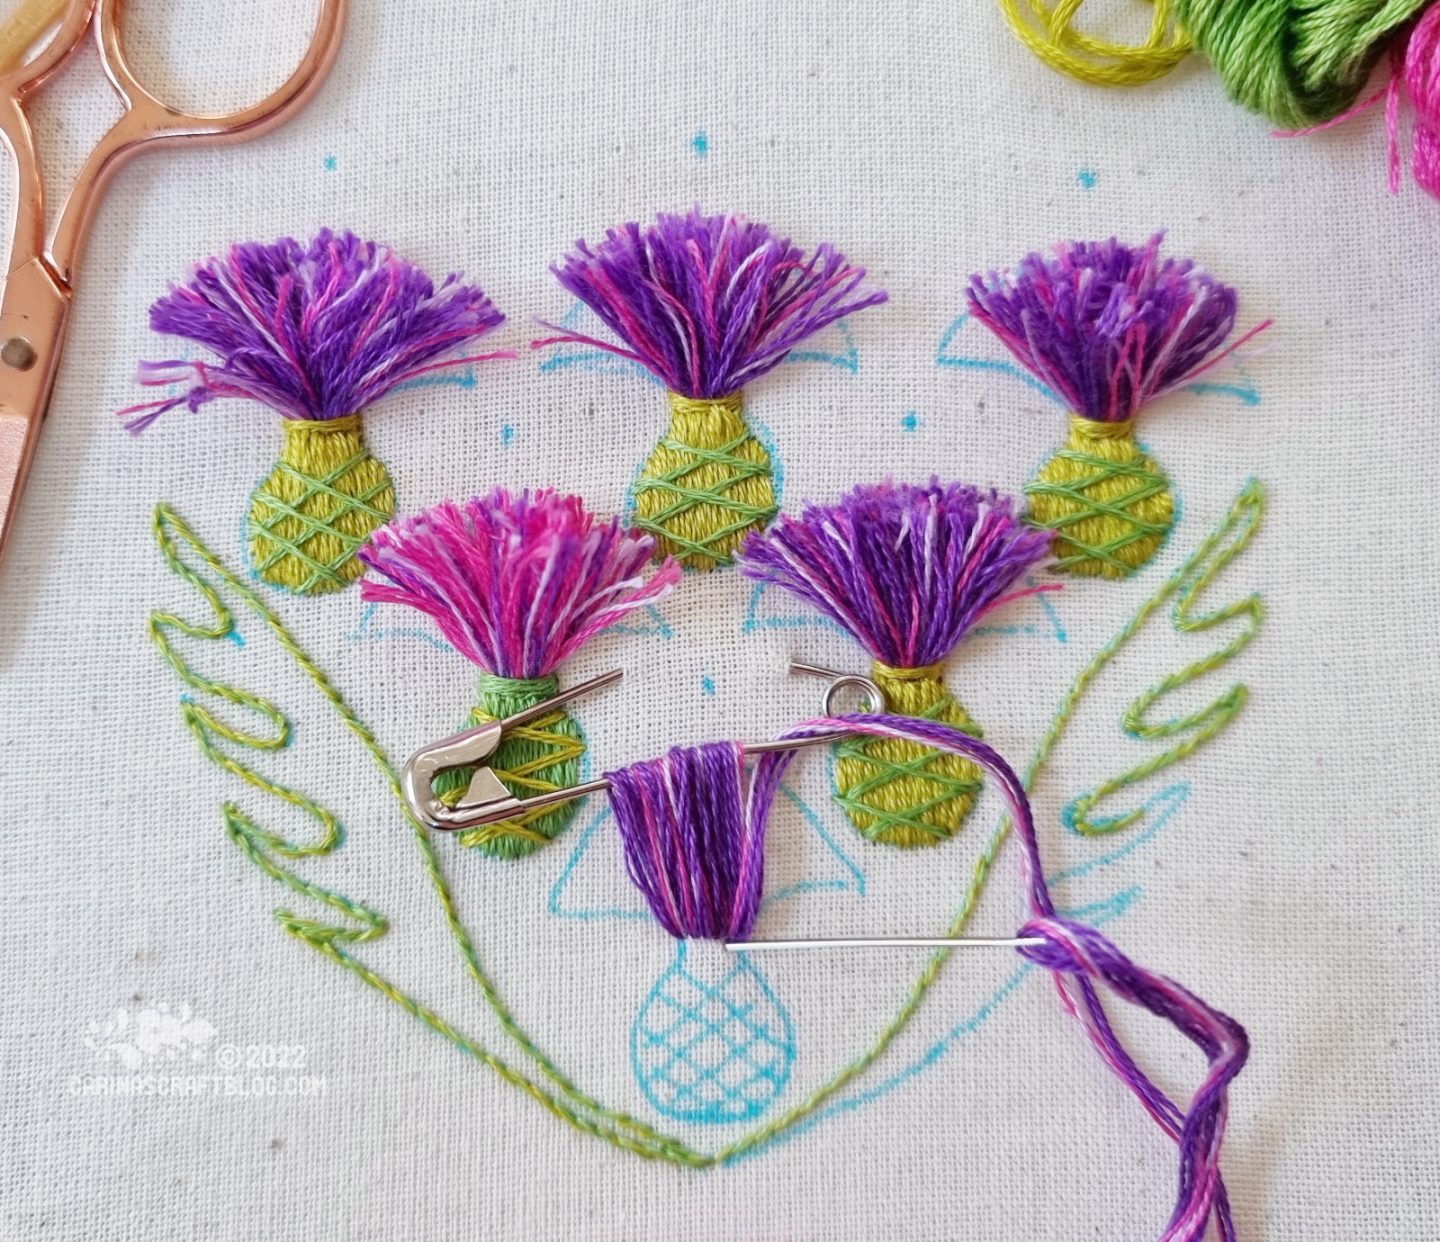 Embroidered thistles on white fabric,.